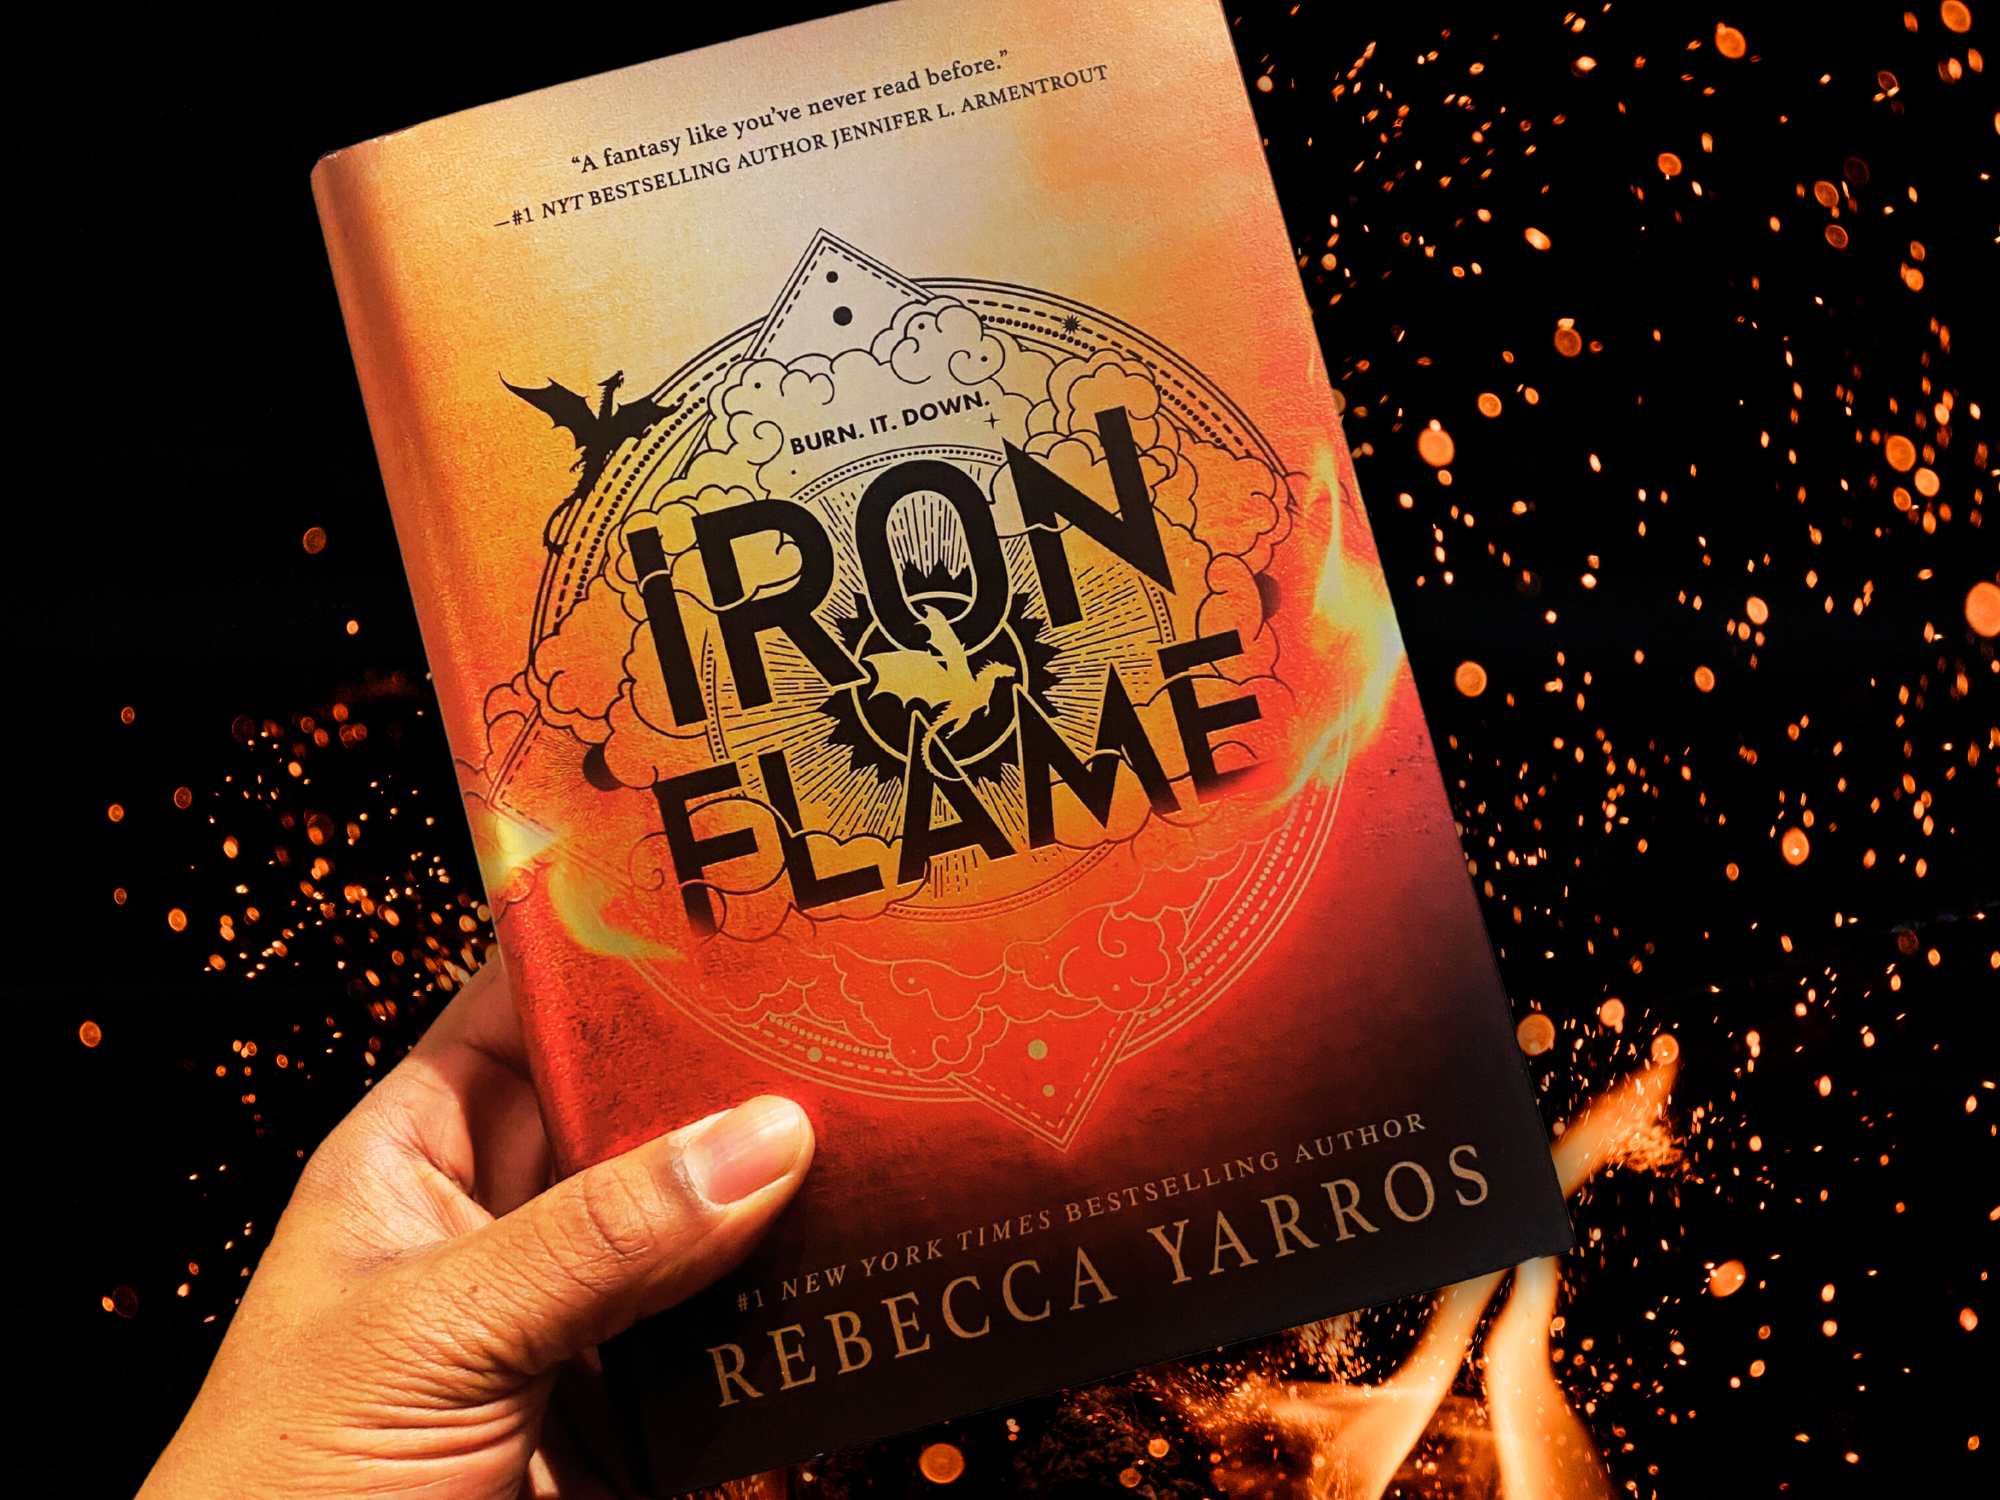 Iron flame book review: better than Fourth Wing?